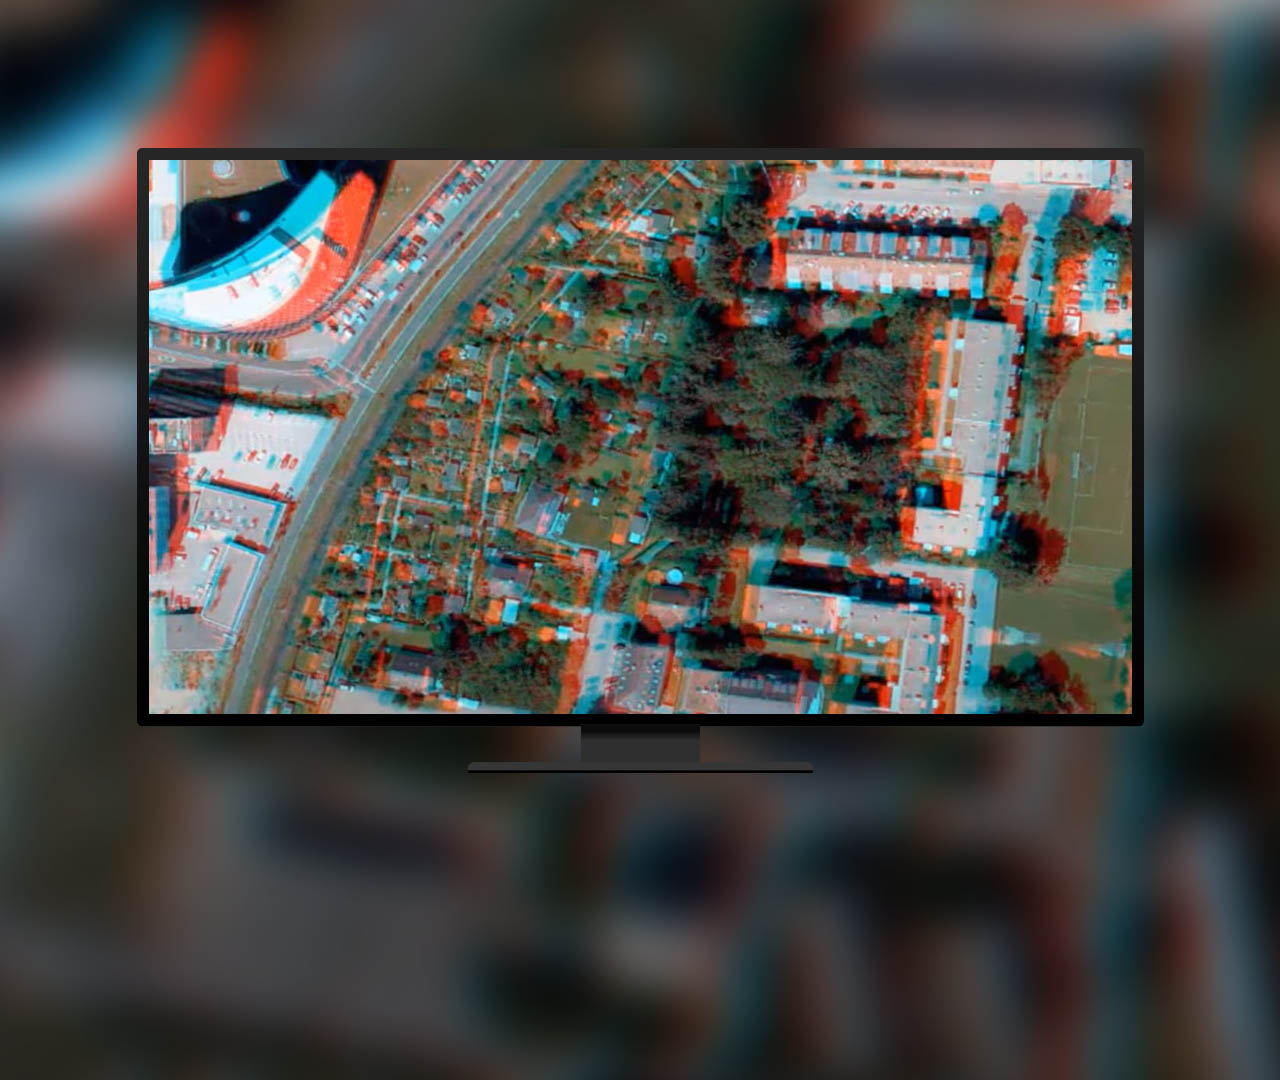 An aerial view of a building haloed with blue and red that uses stereo viewing capabilities